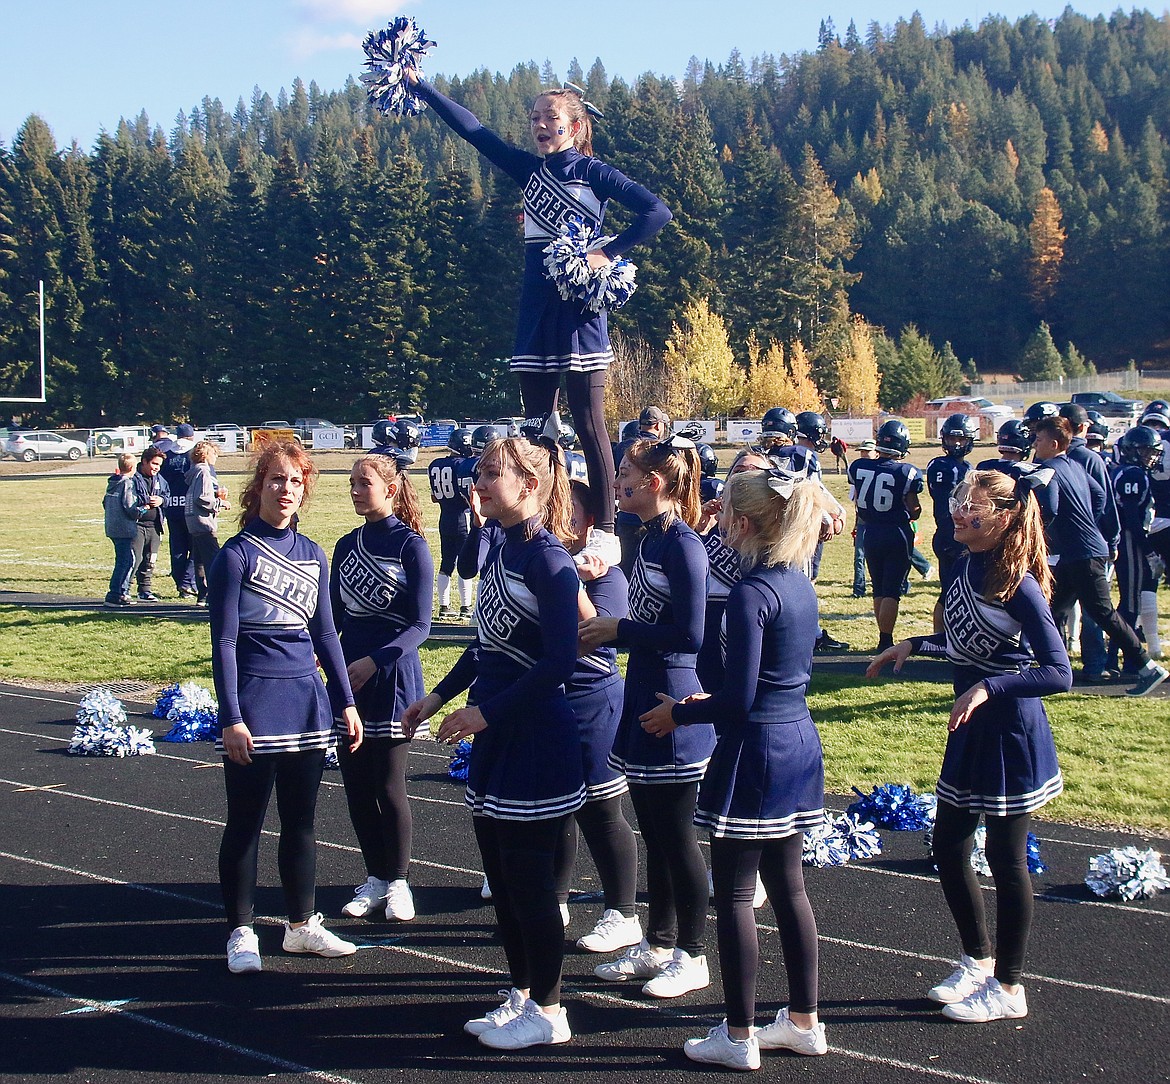 Badger cheer team keeping the crowd engaged at playoff game.